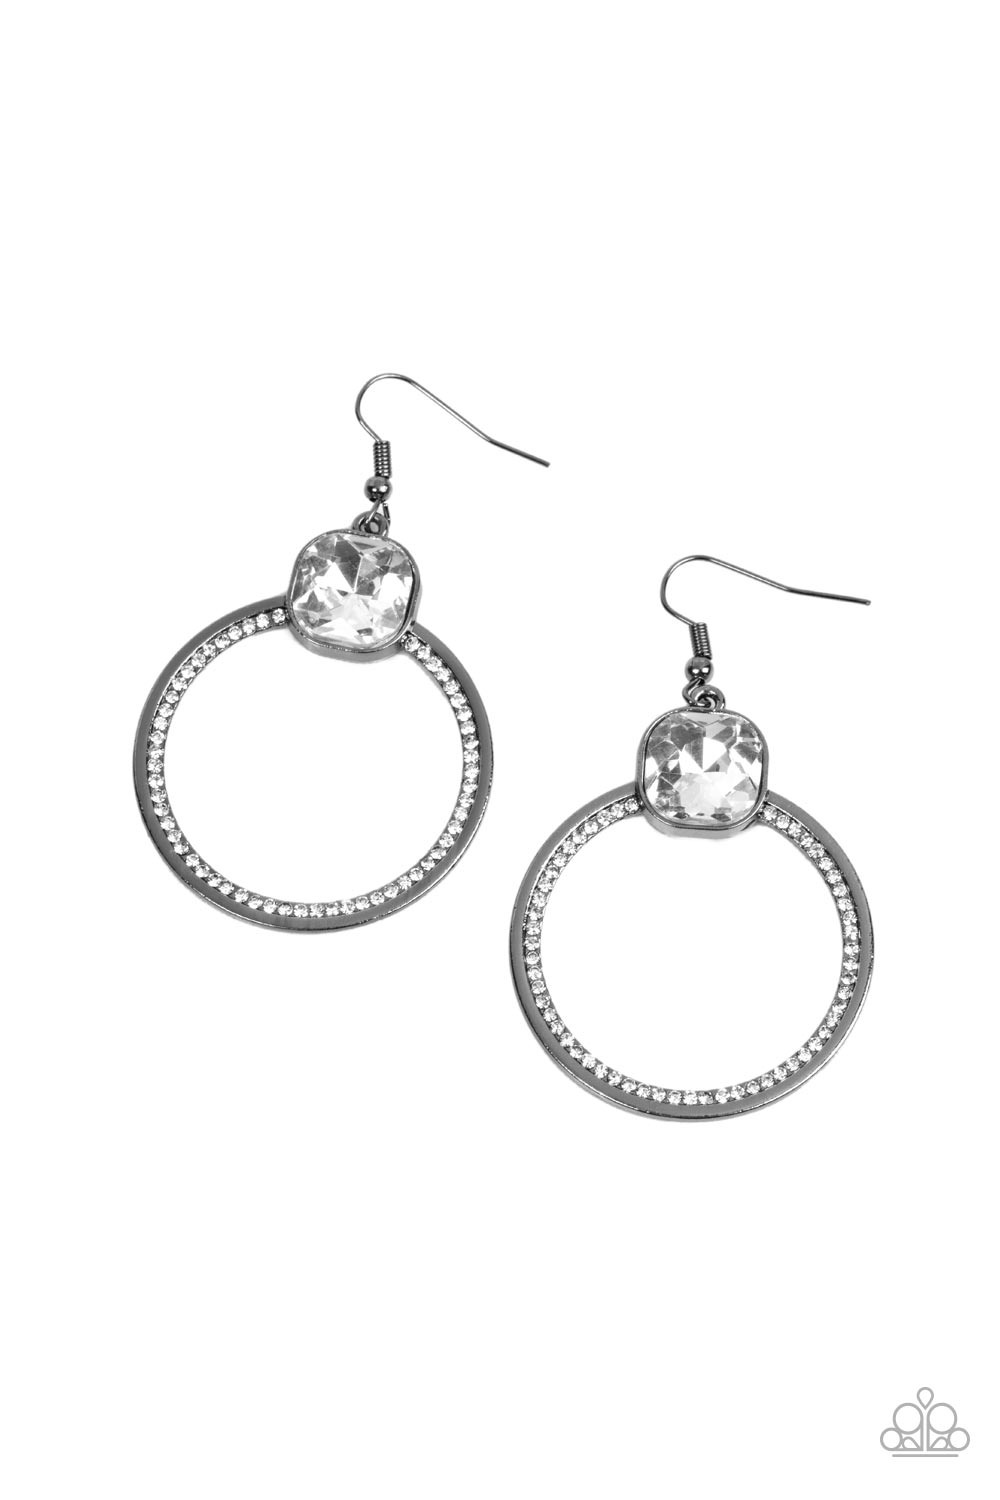 Cheers to Happily Ever After - Black Gem Fashion Earrings - Paparazzi Accessories - An oversized white gem sits atop a gunmetal hoop with an inner ring encrusted in glitzy white rhinestones, resulting in a timeless twinkle. Earring attaches to a standard fishhook fitting. 